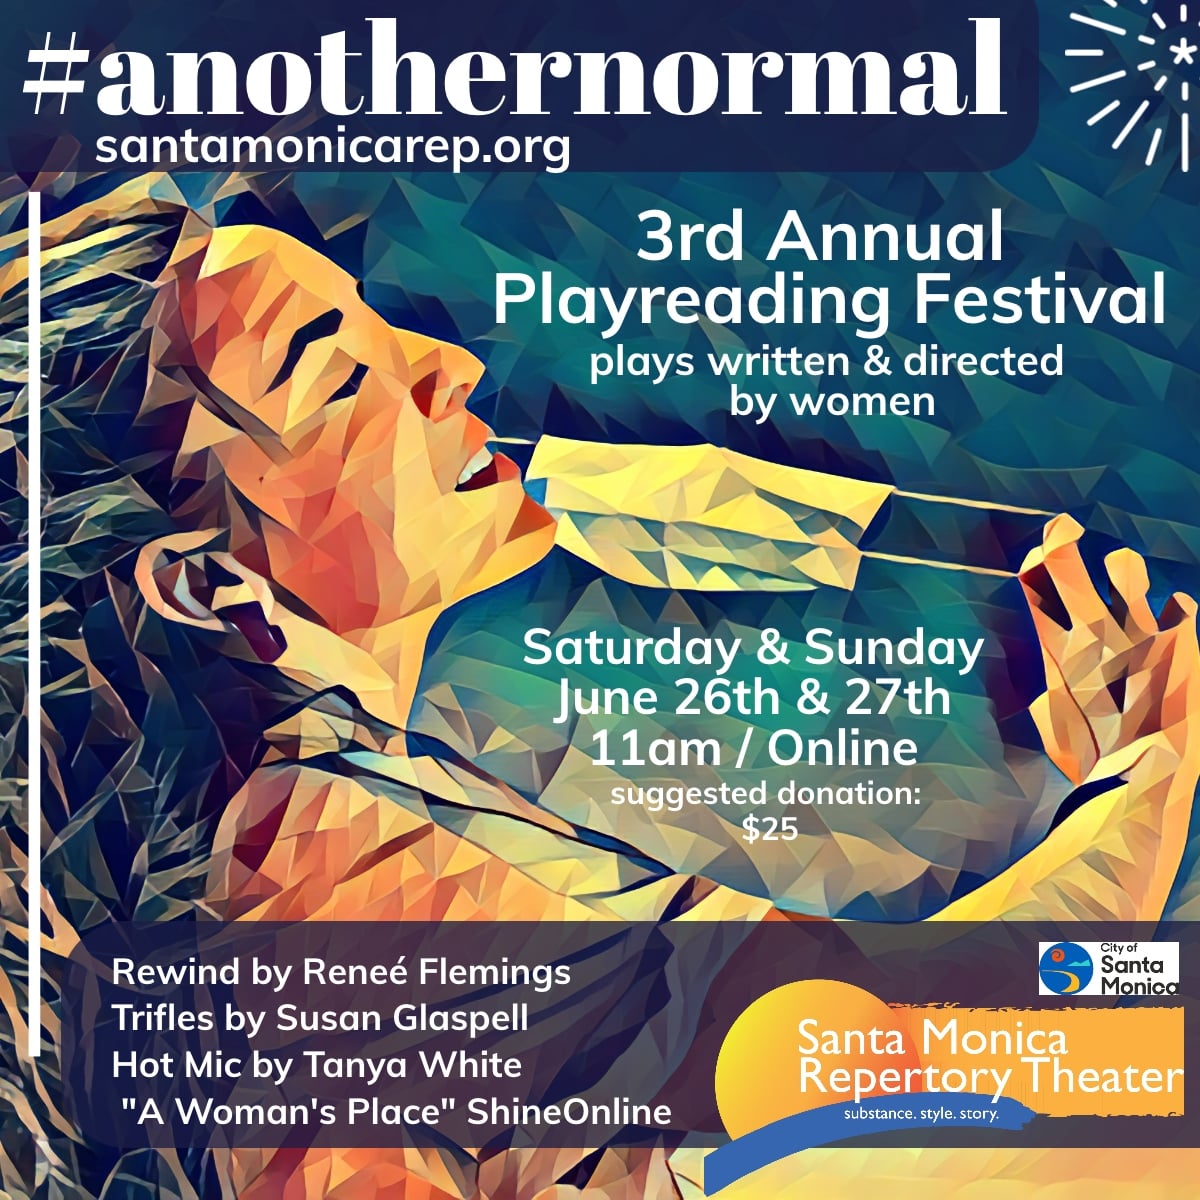 3rd Annual Playreading Festival #anothernormal